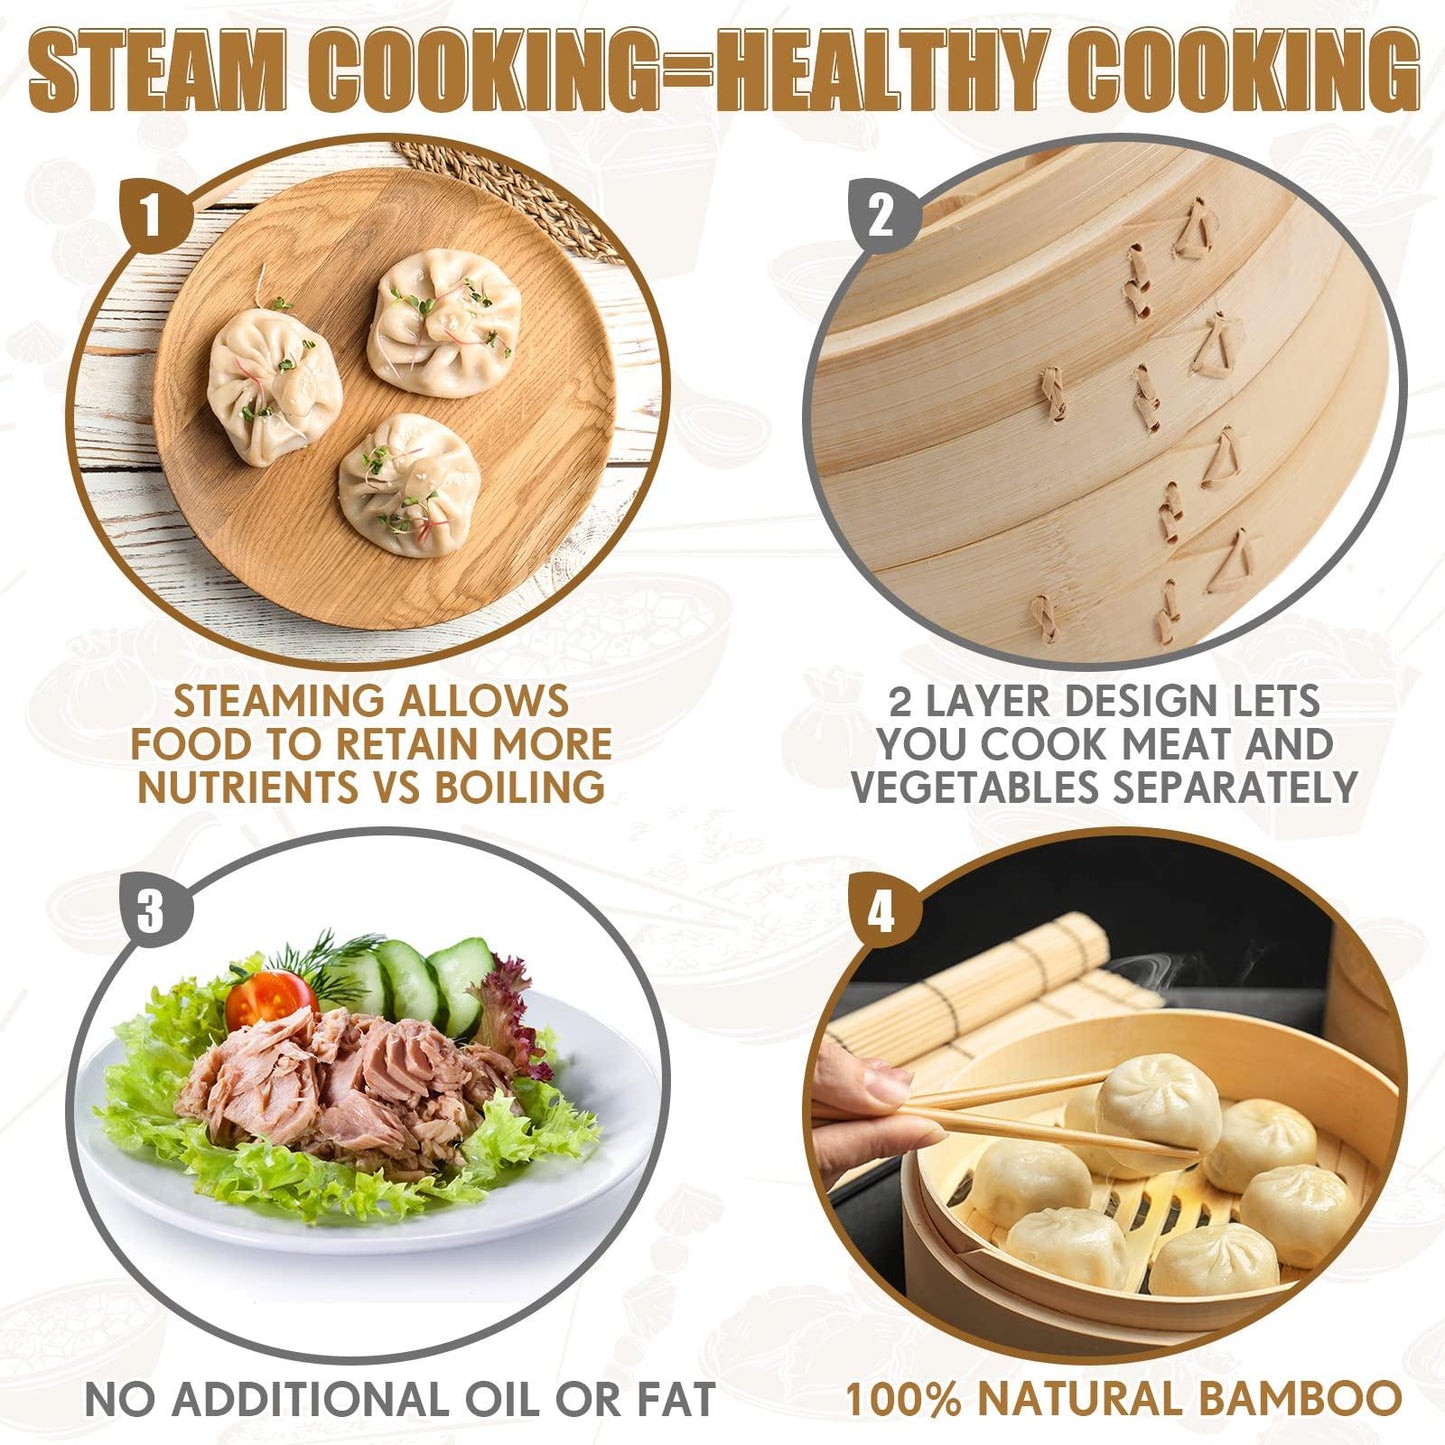 2 Tier Bamboo Steamer Basket Set Including Stainless Steel Steamer Ring Dumpling Maker Mold and Cutter Meat Spoon 2 Pairs Bamboo Chopsticks 2 Pcs Sauce Dish 50 Pcs Paper Liners for Kitchen (10 Inch) - CookCave